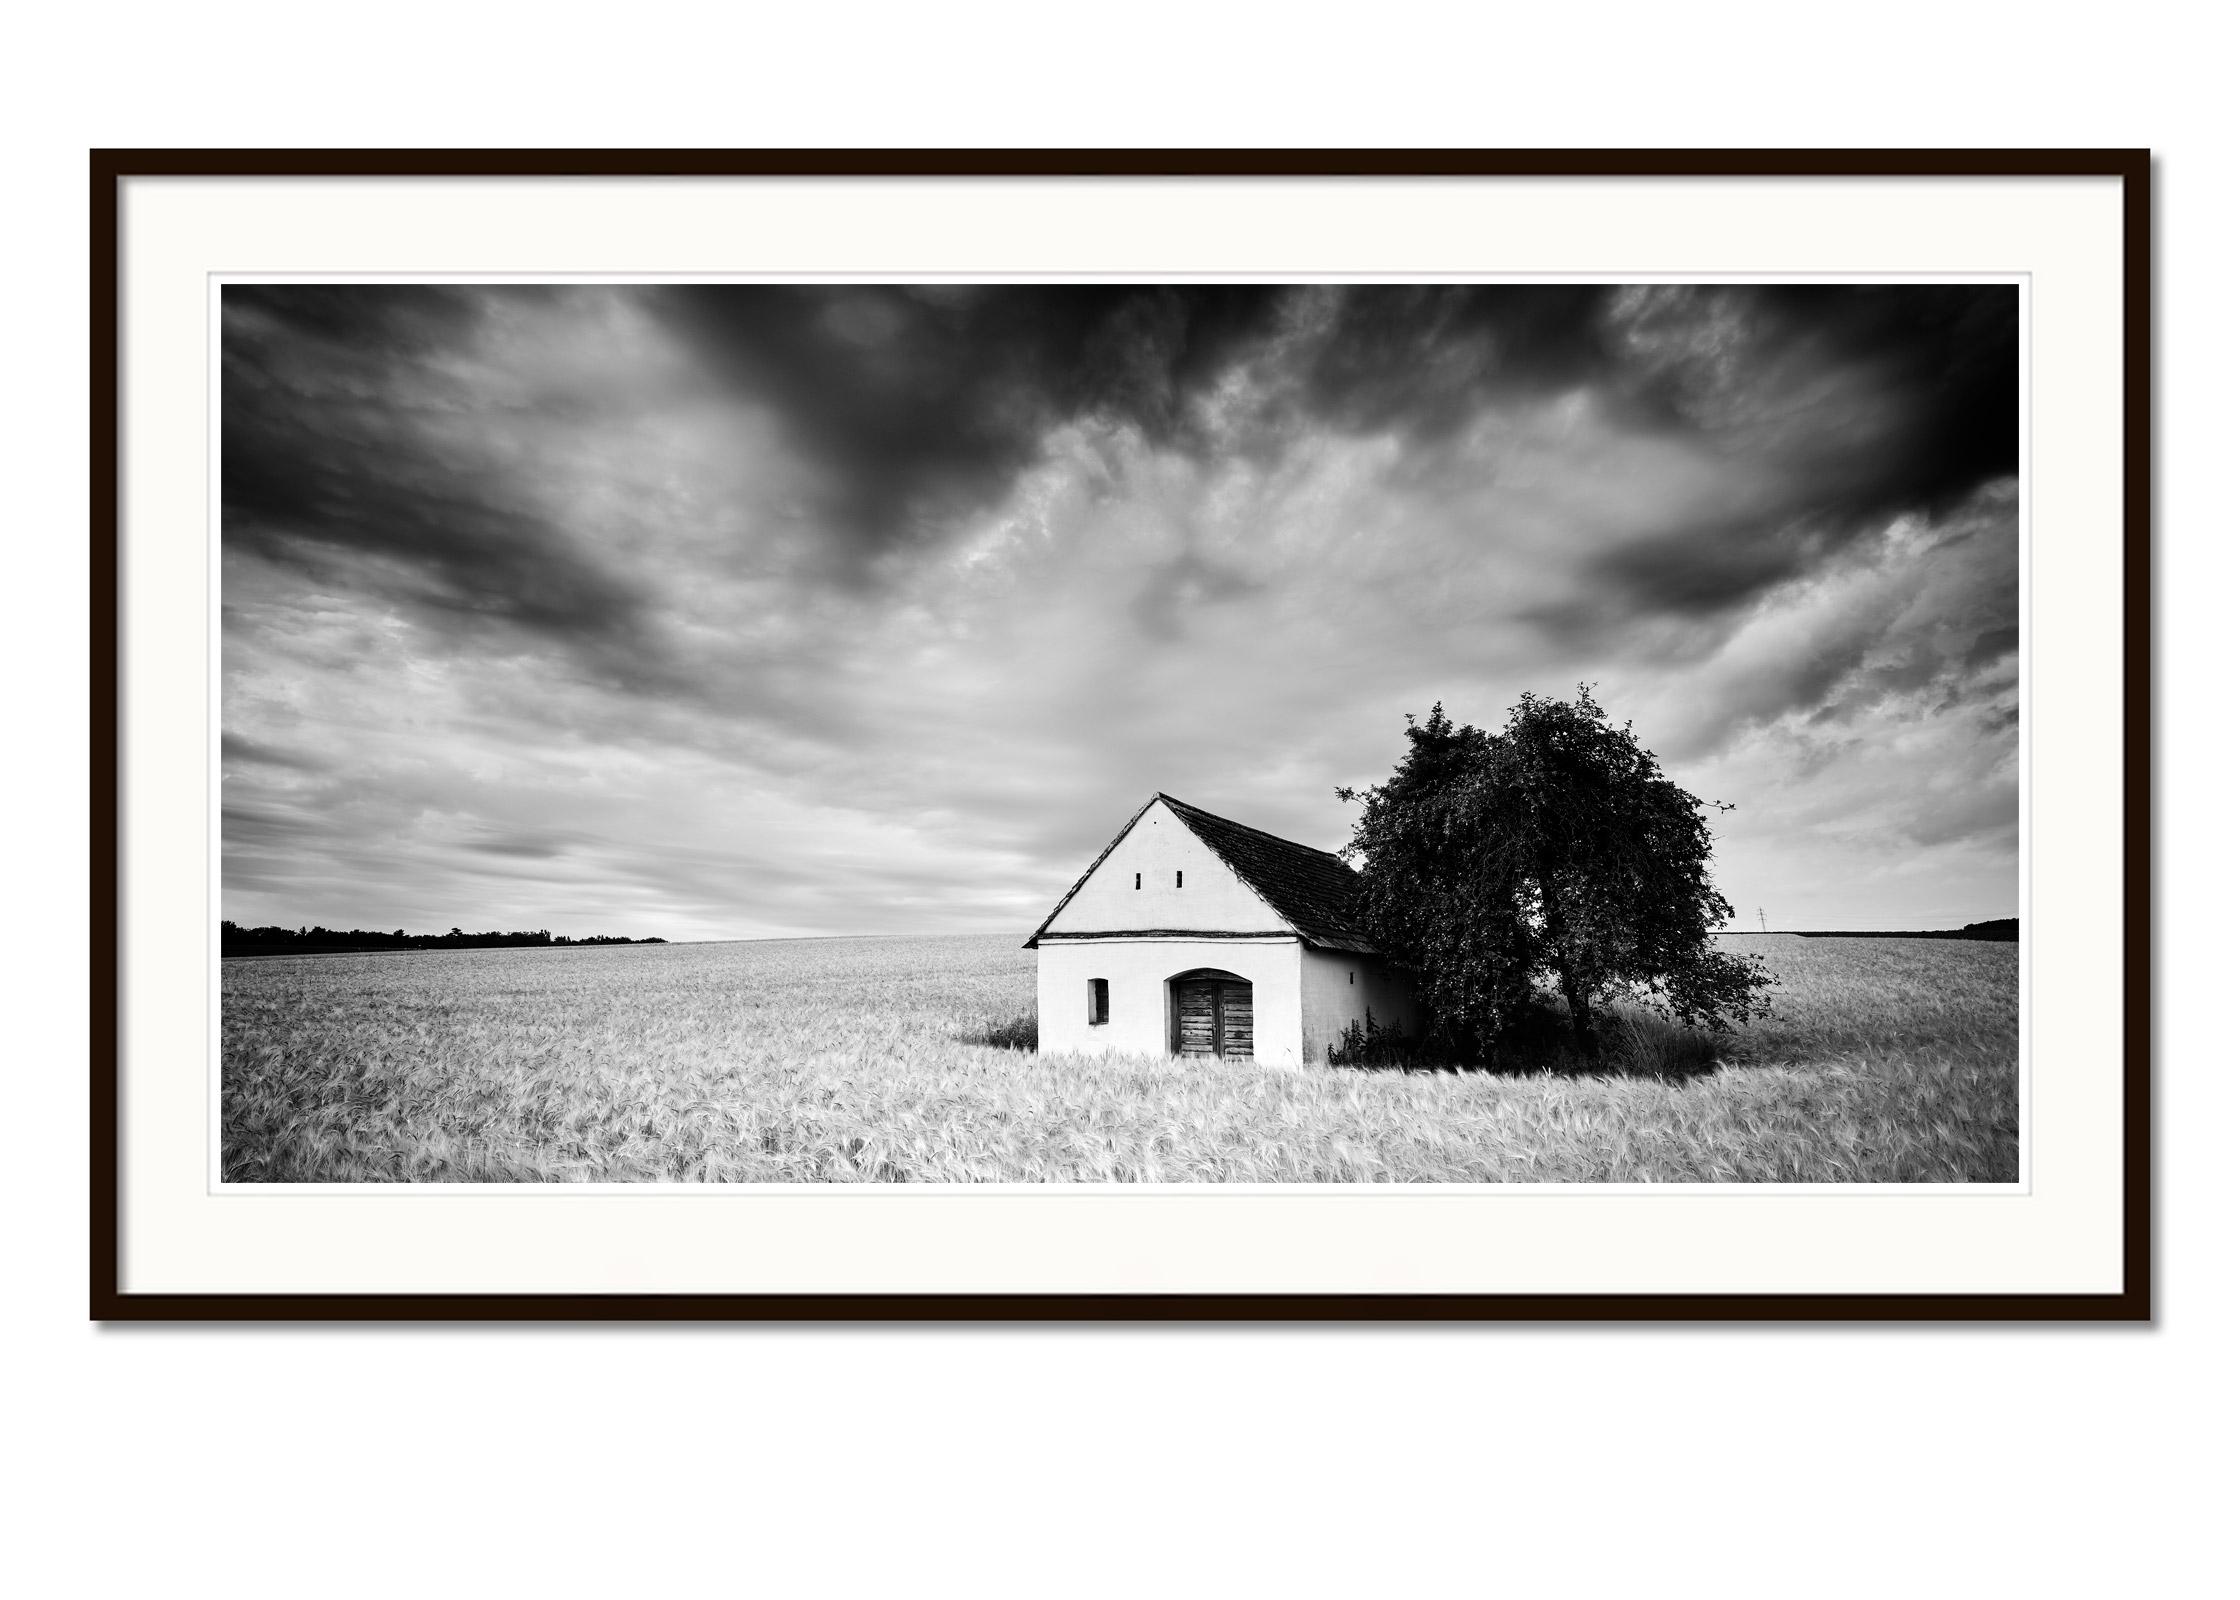 Wine Press House Panorama, Farmland, black and white photography, art landscape - Gray Black and White Photograph by Gerald Berghammer